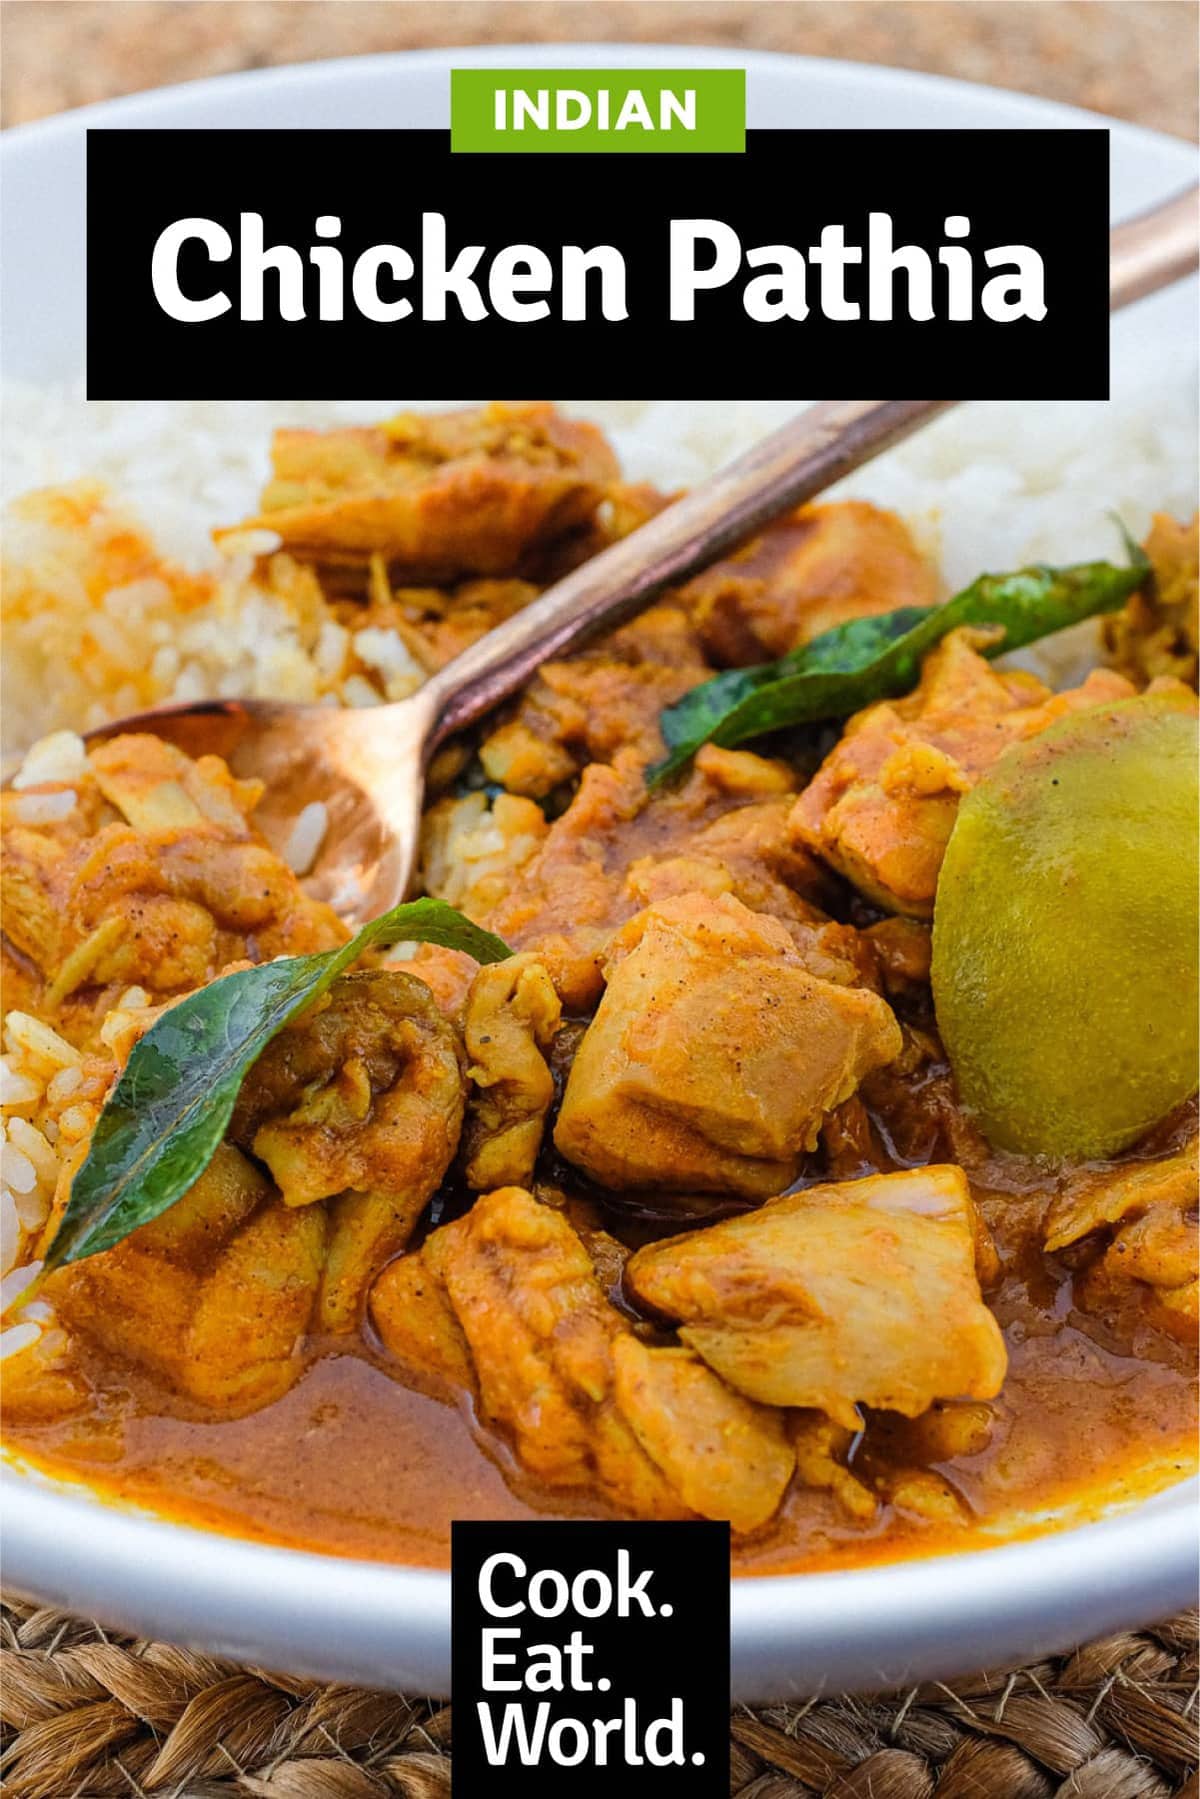 A bowl of Chicken Pathia Curry from cookeatworld.com